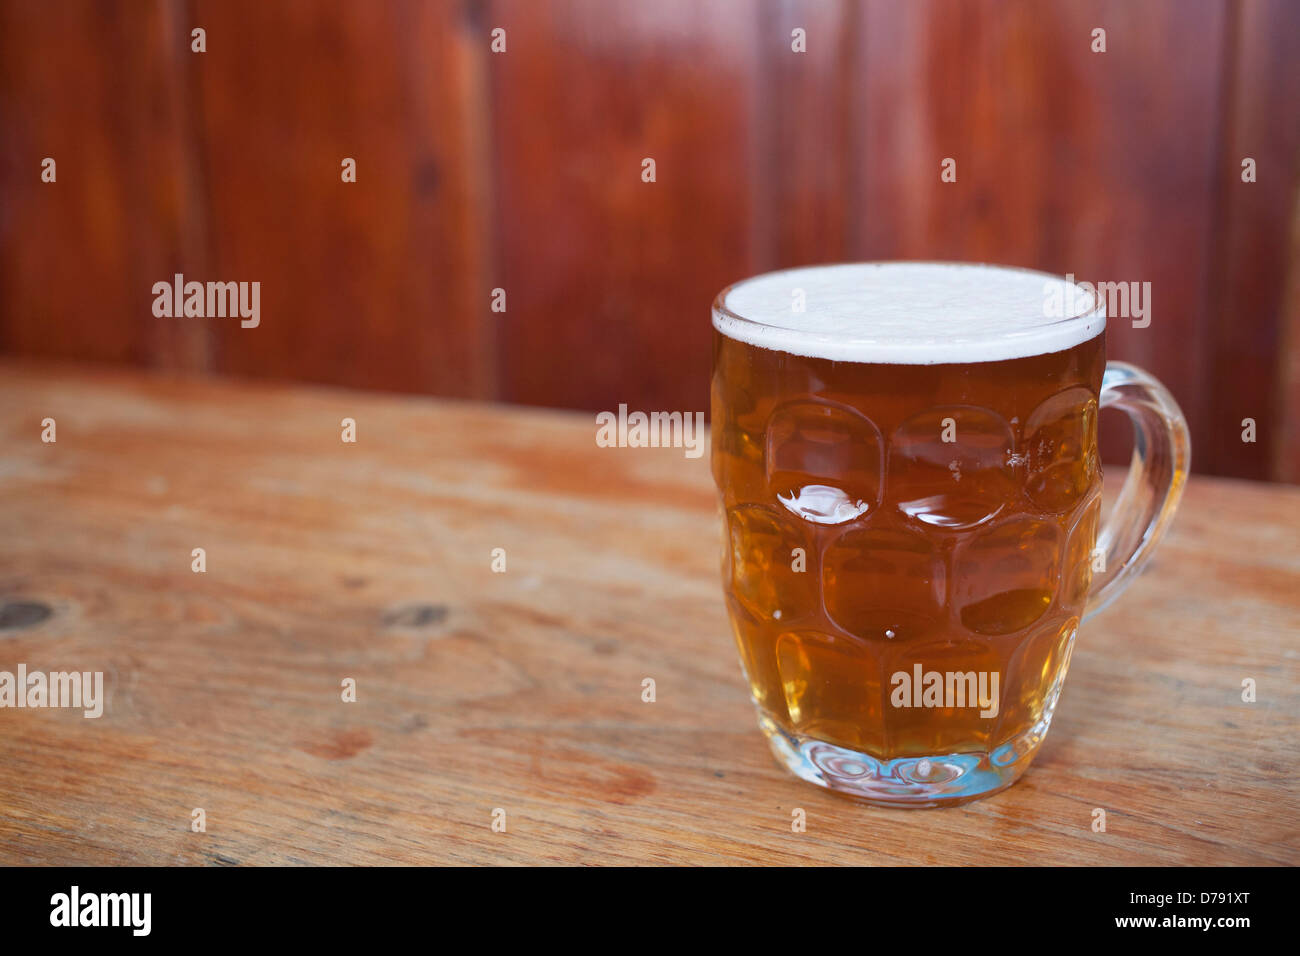 Pint of ale in an old fashioned jug beer glass. Stock Photo